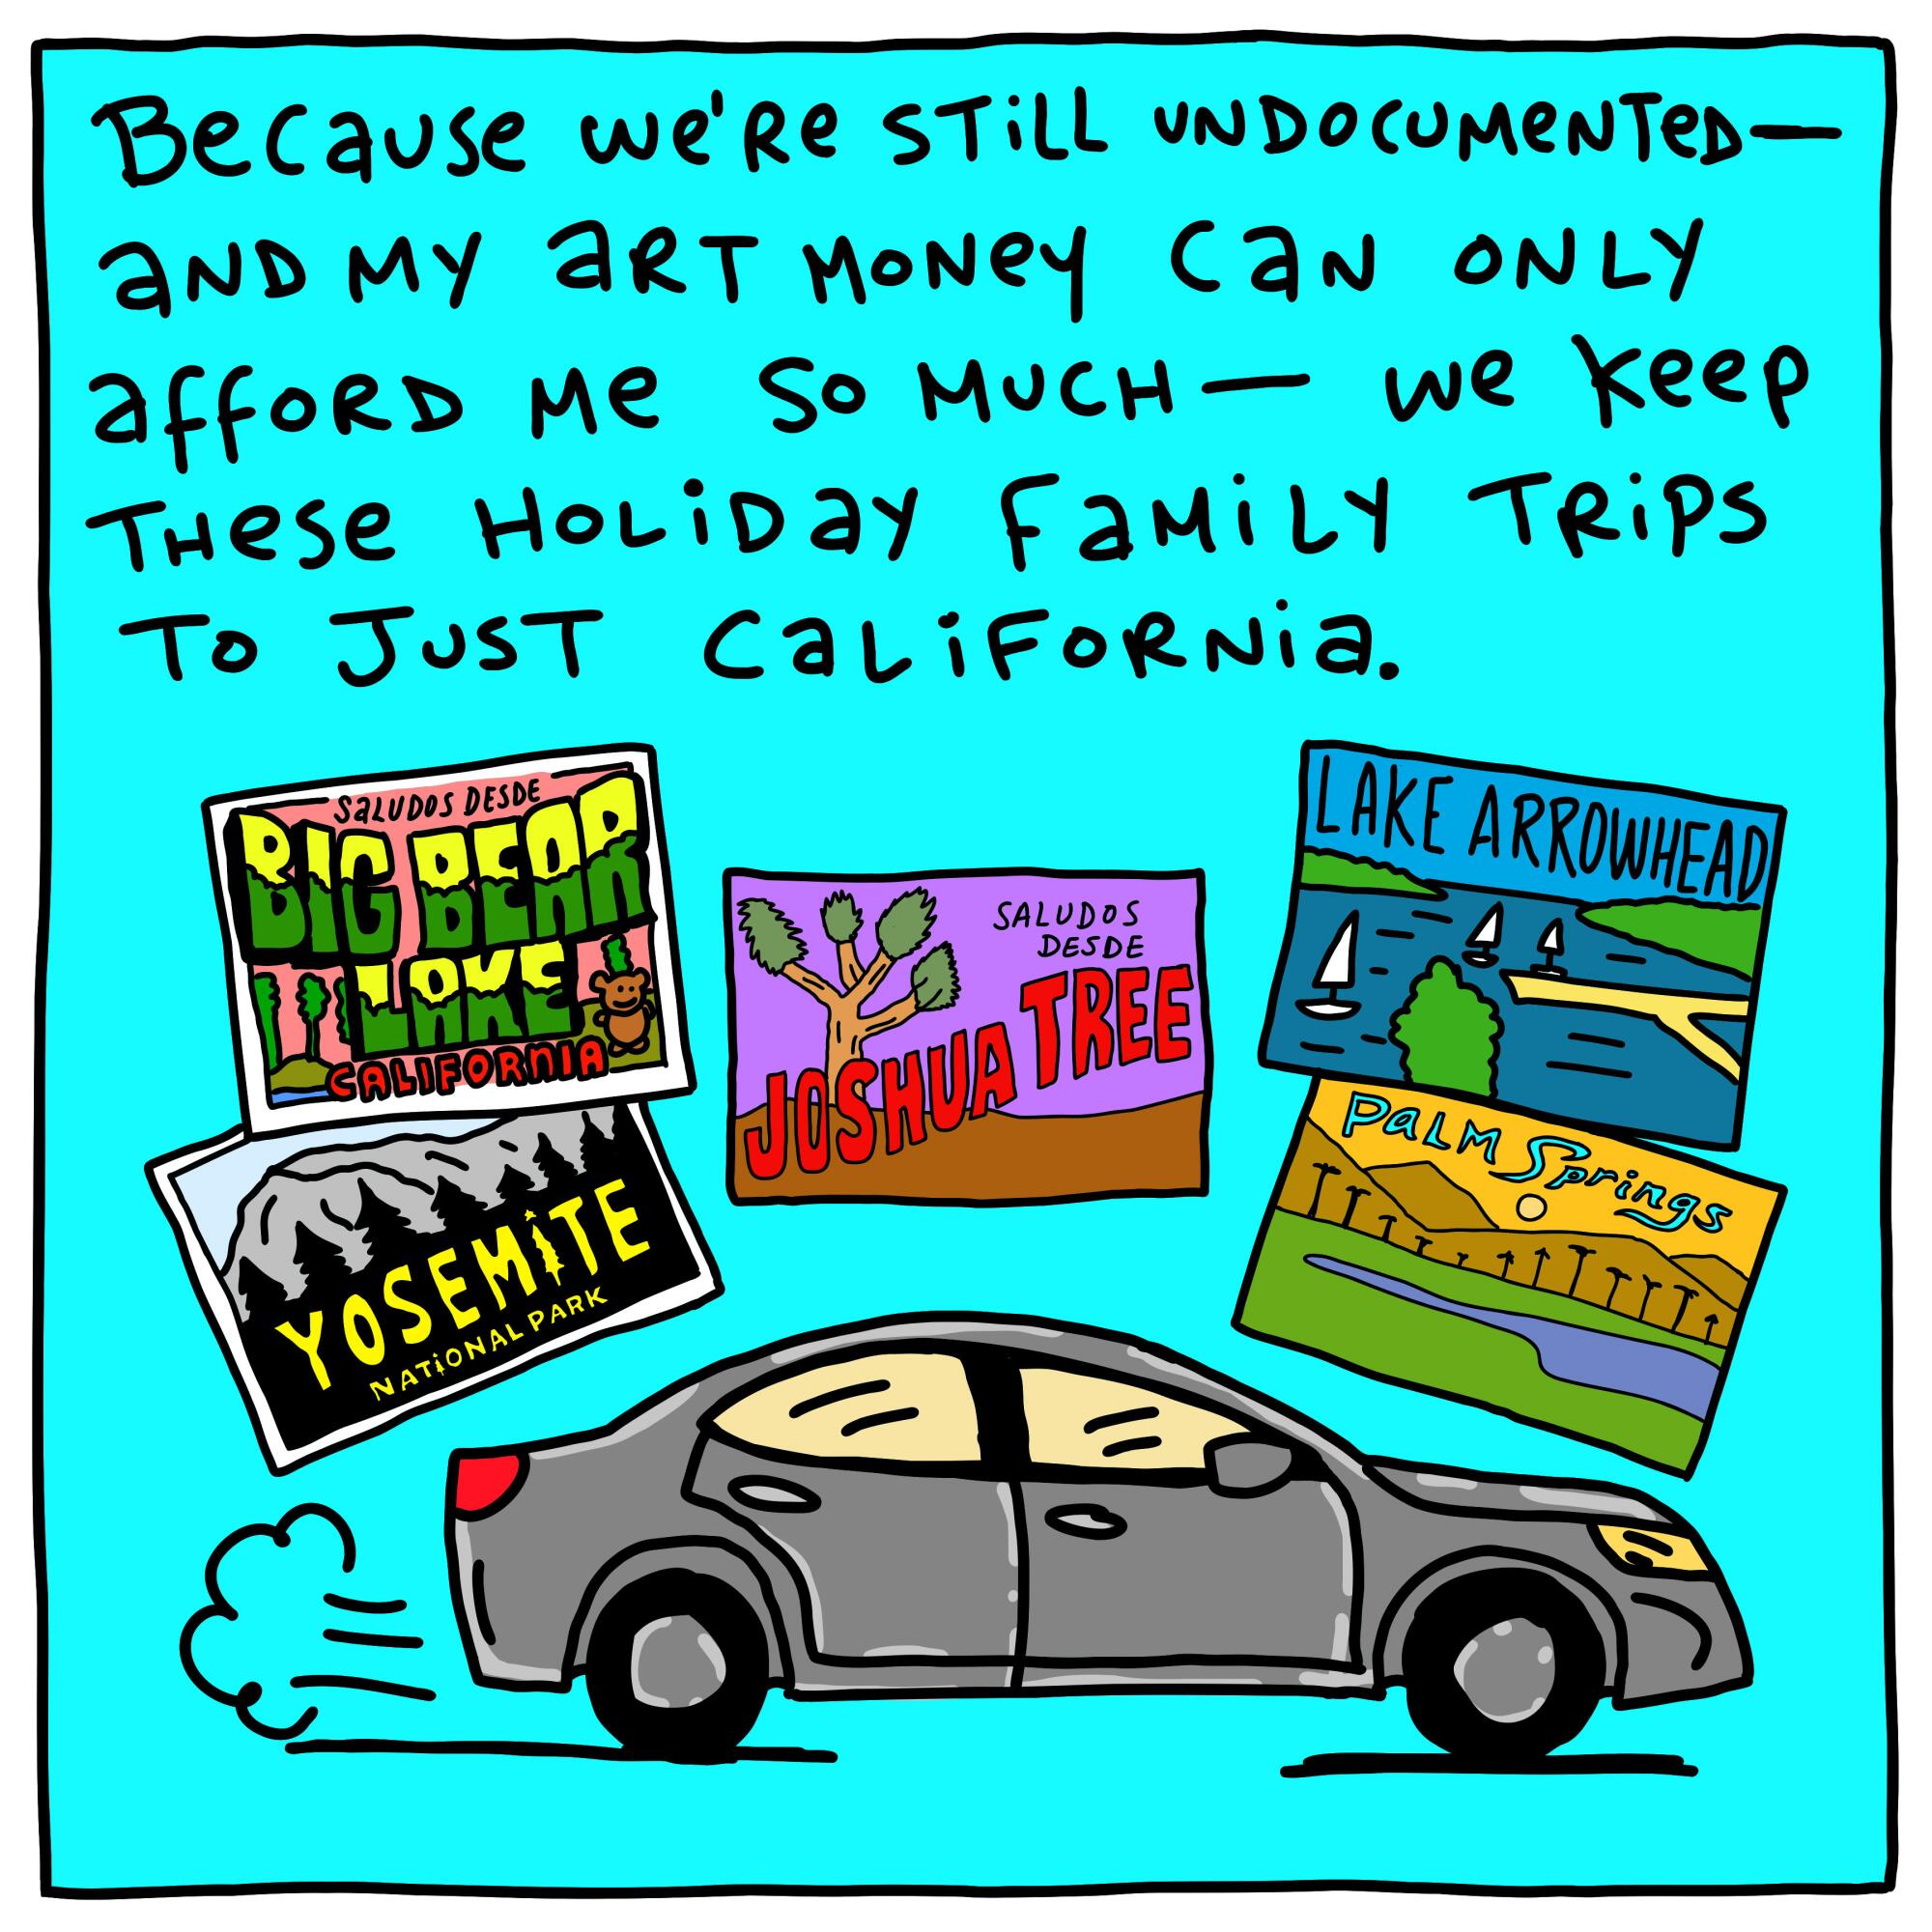 Because we're still undocumented we keep these holiday family trips to just California